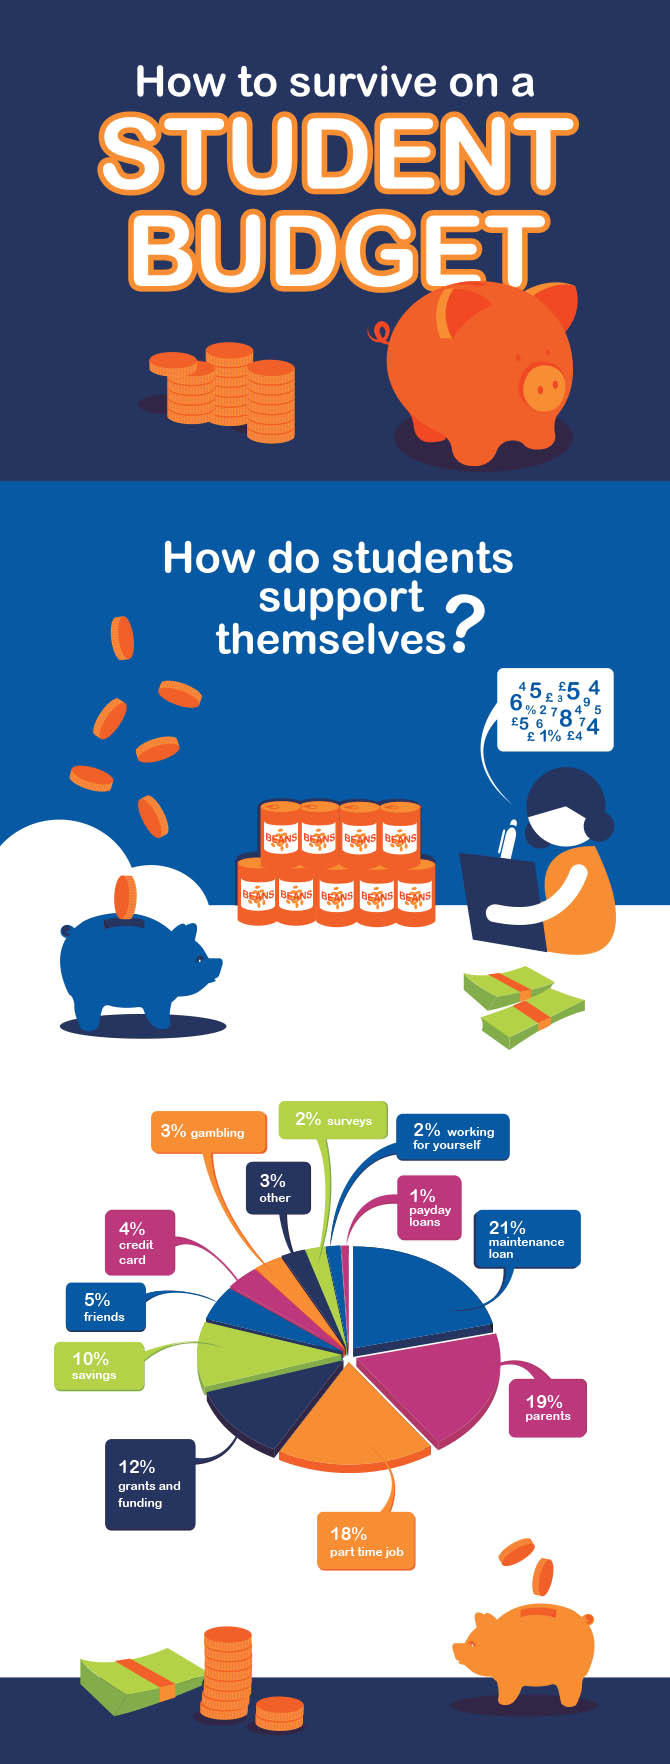 How to Survive on a Student Budget by B&M Bargains